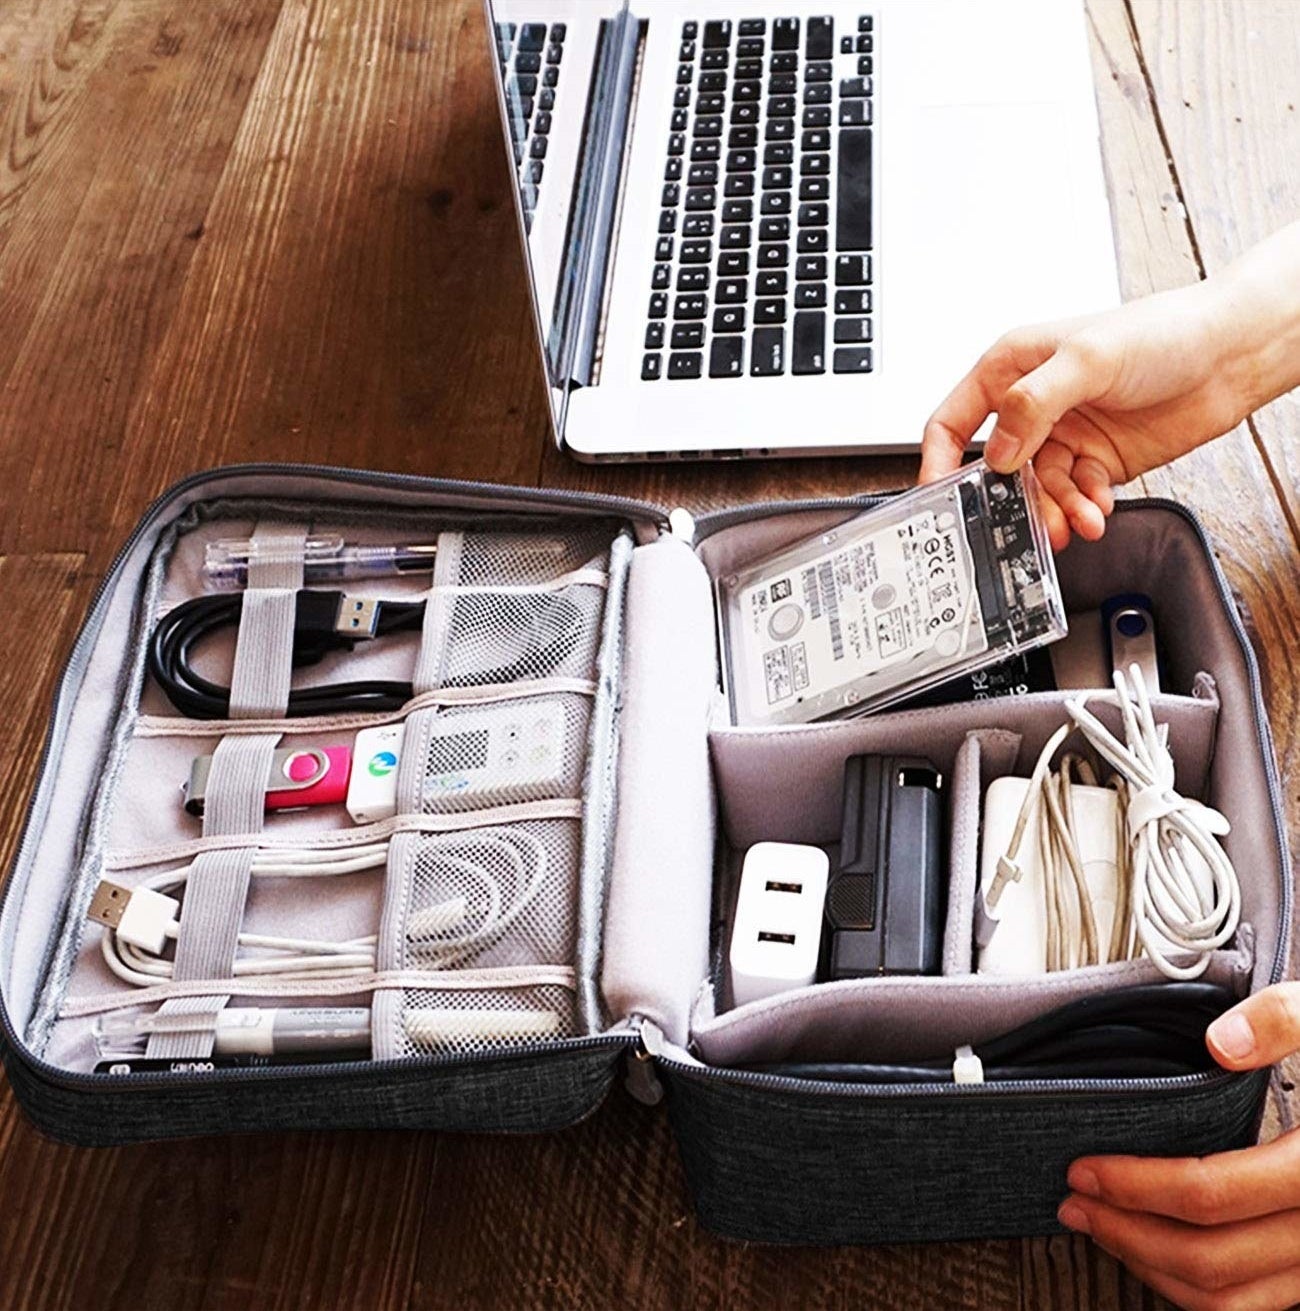 Cables, chargers, pen drives and other electronic equipment stored neatly in the organiser